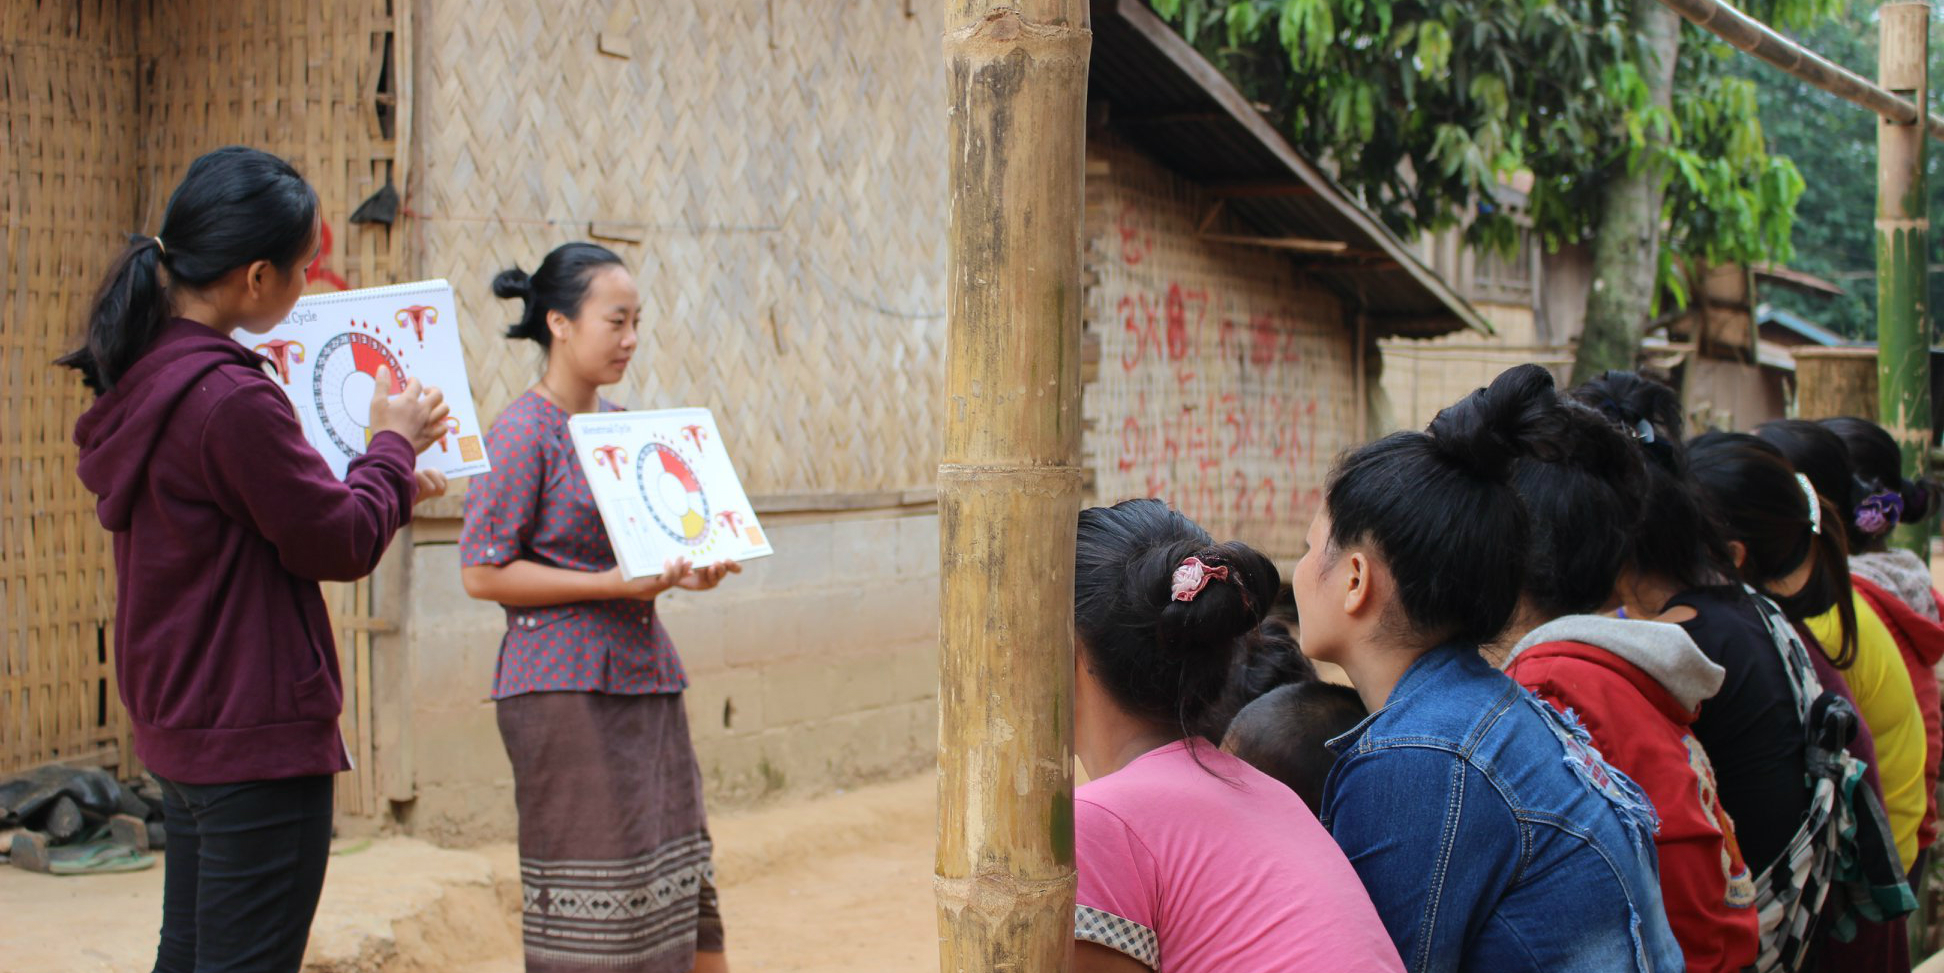 Pay to volunteer with GVI, and your program fees go toward increasing local capacity. Pictured: Two local women from Laos conduct a menstrual health workshop in a rural village.